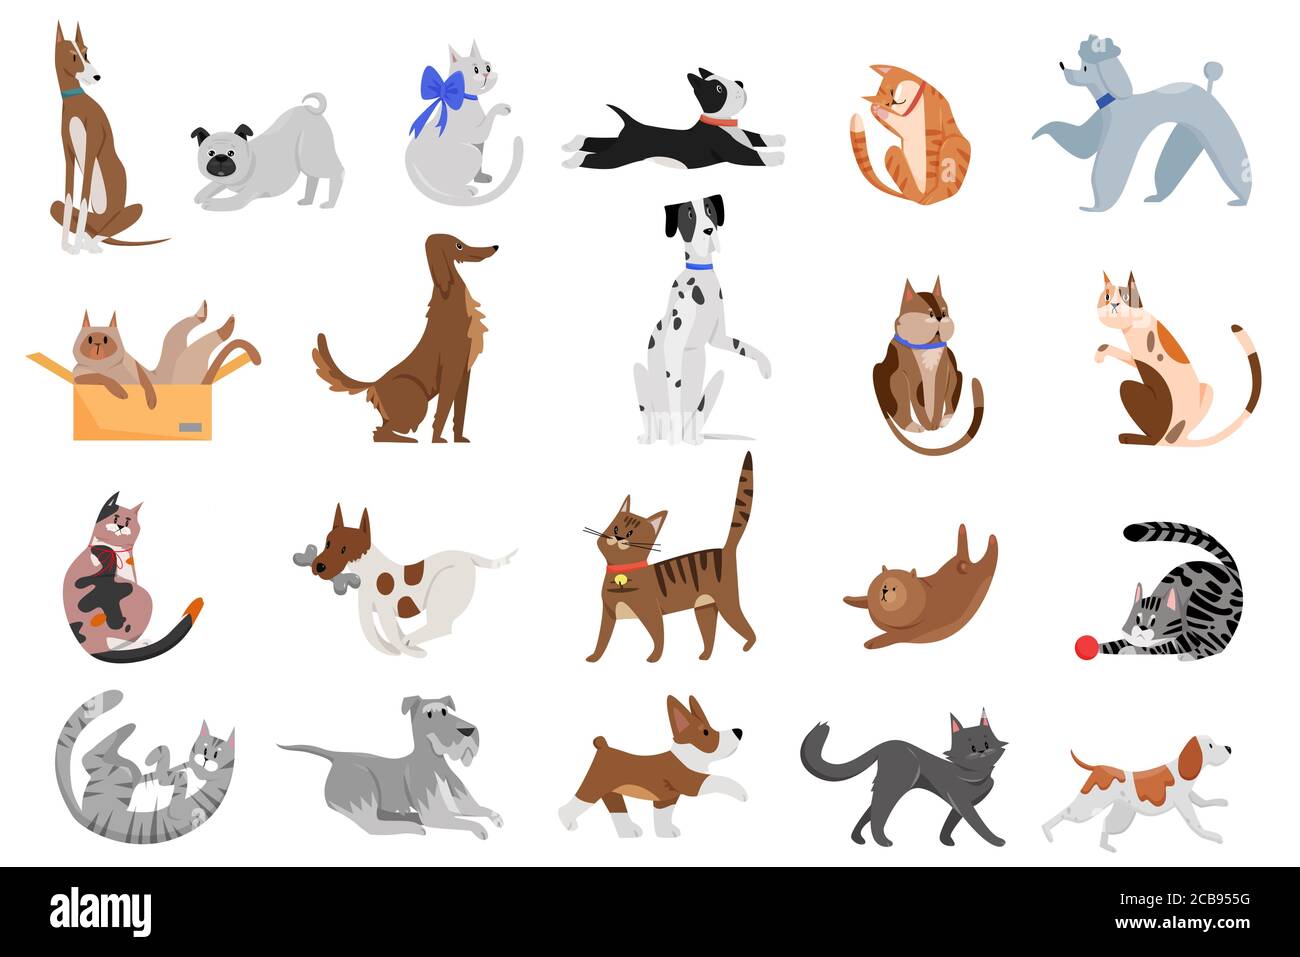 Cute funny cartoon domestic pets characters flat vector illustration. Different breed of cats and dogs walking, playing and posing. Stock Vector